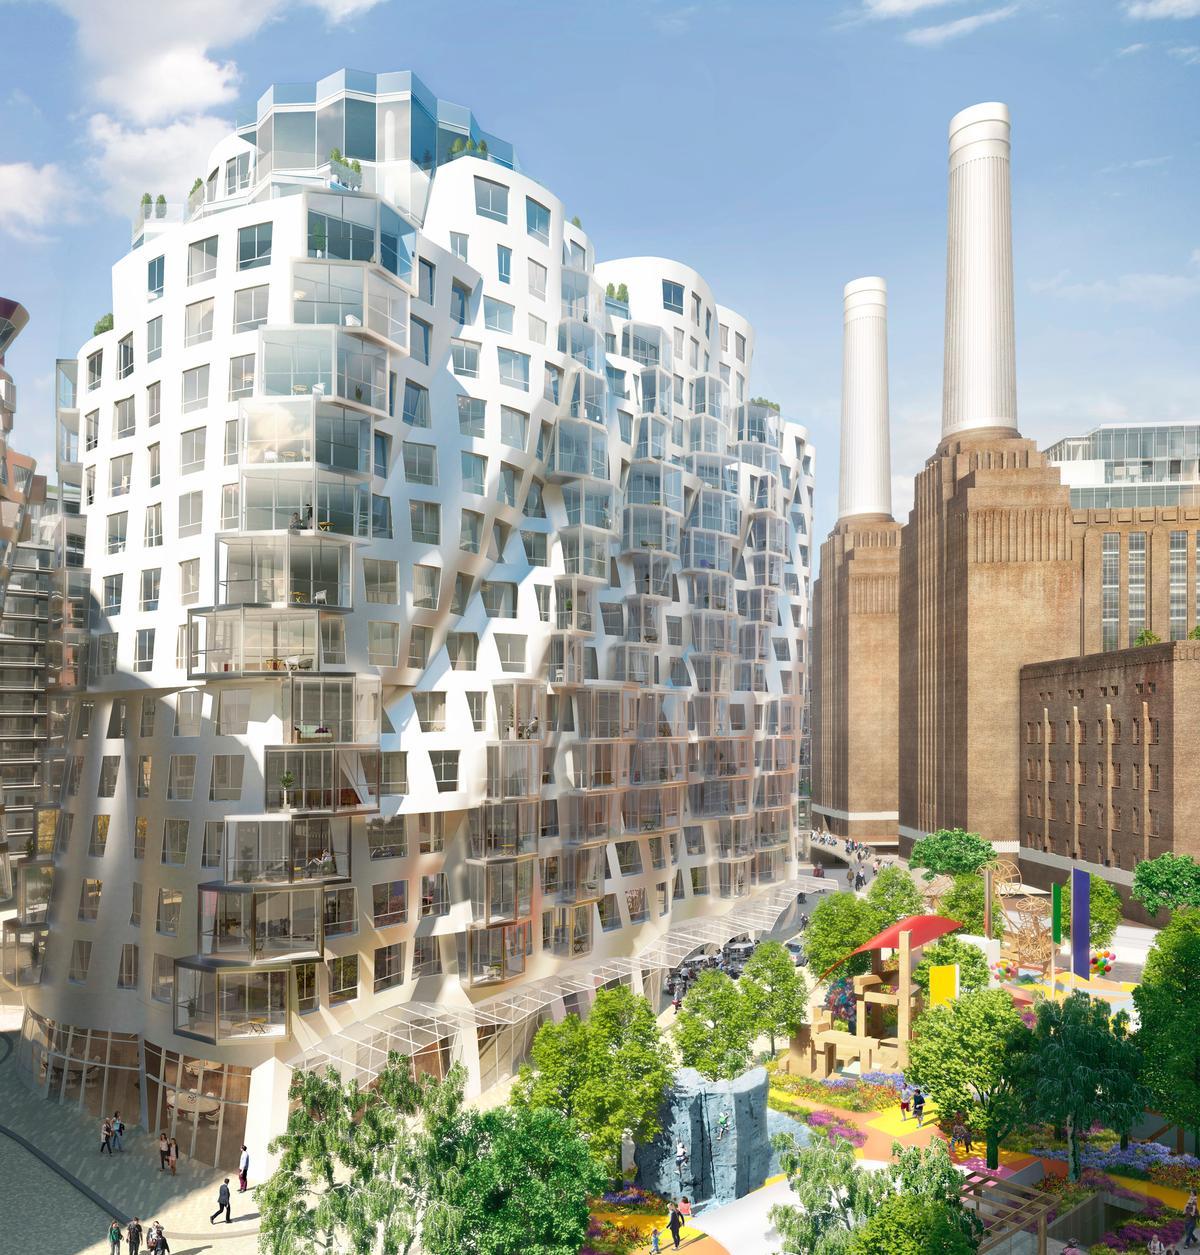 Gehry Partners' Prospect Place and Prospect Park / Battersea Power Station Development Company